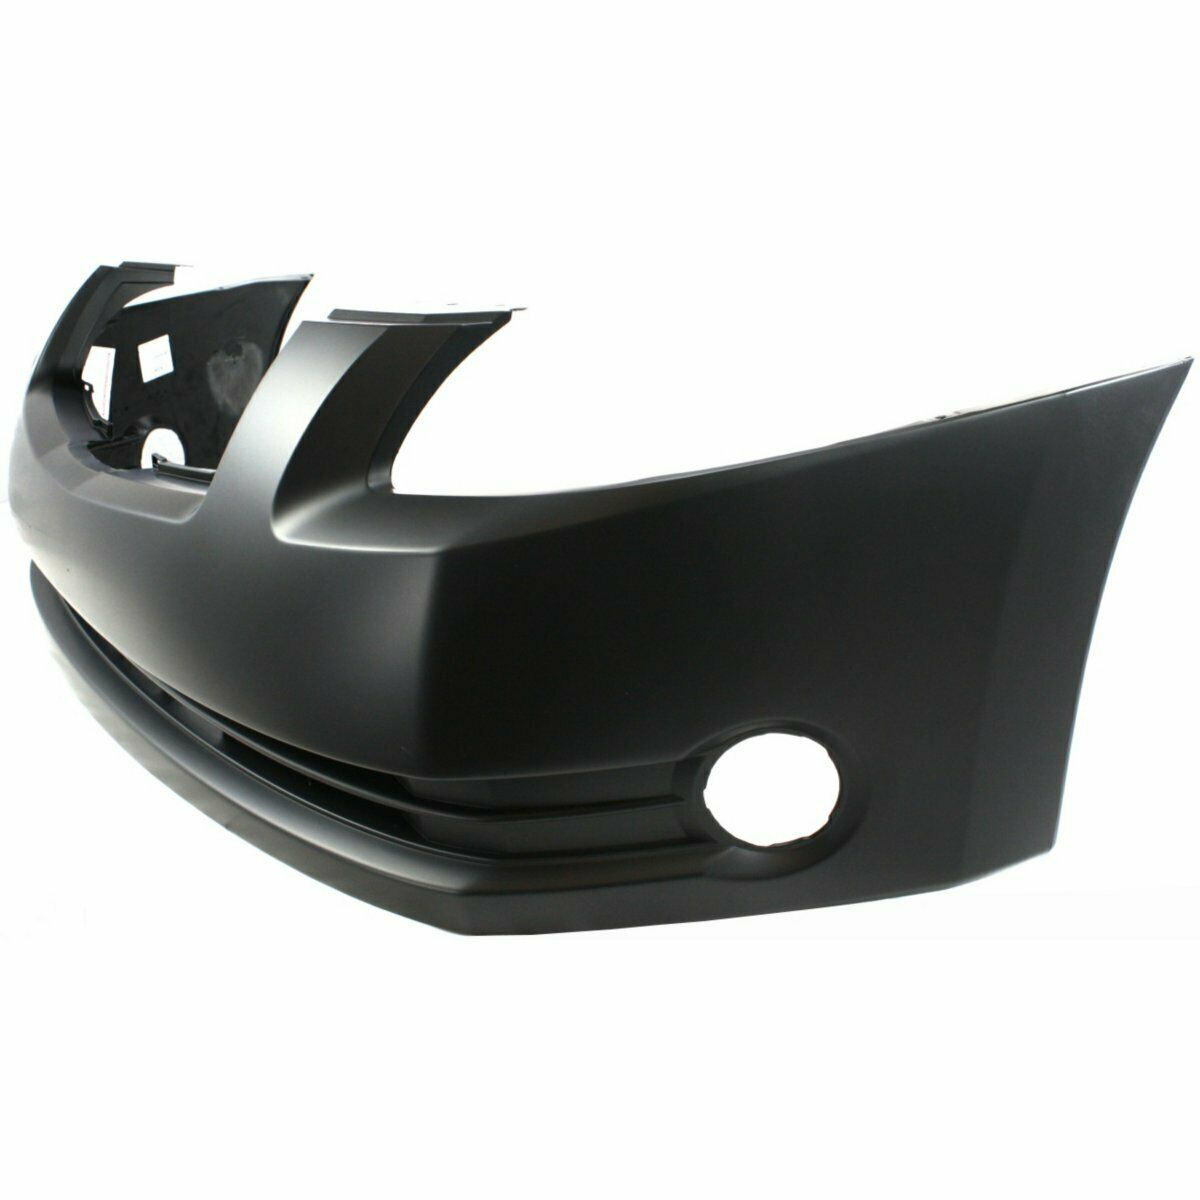 2004-2006 Nissan Maxima Front Bumper Painted to Match